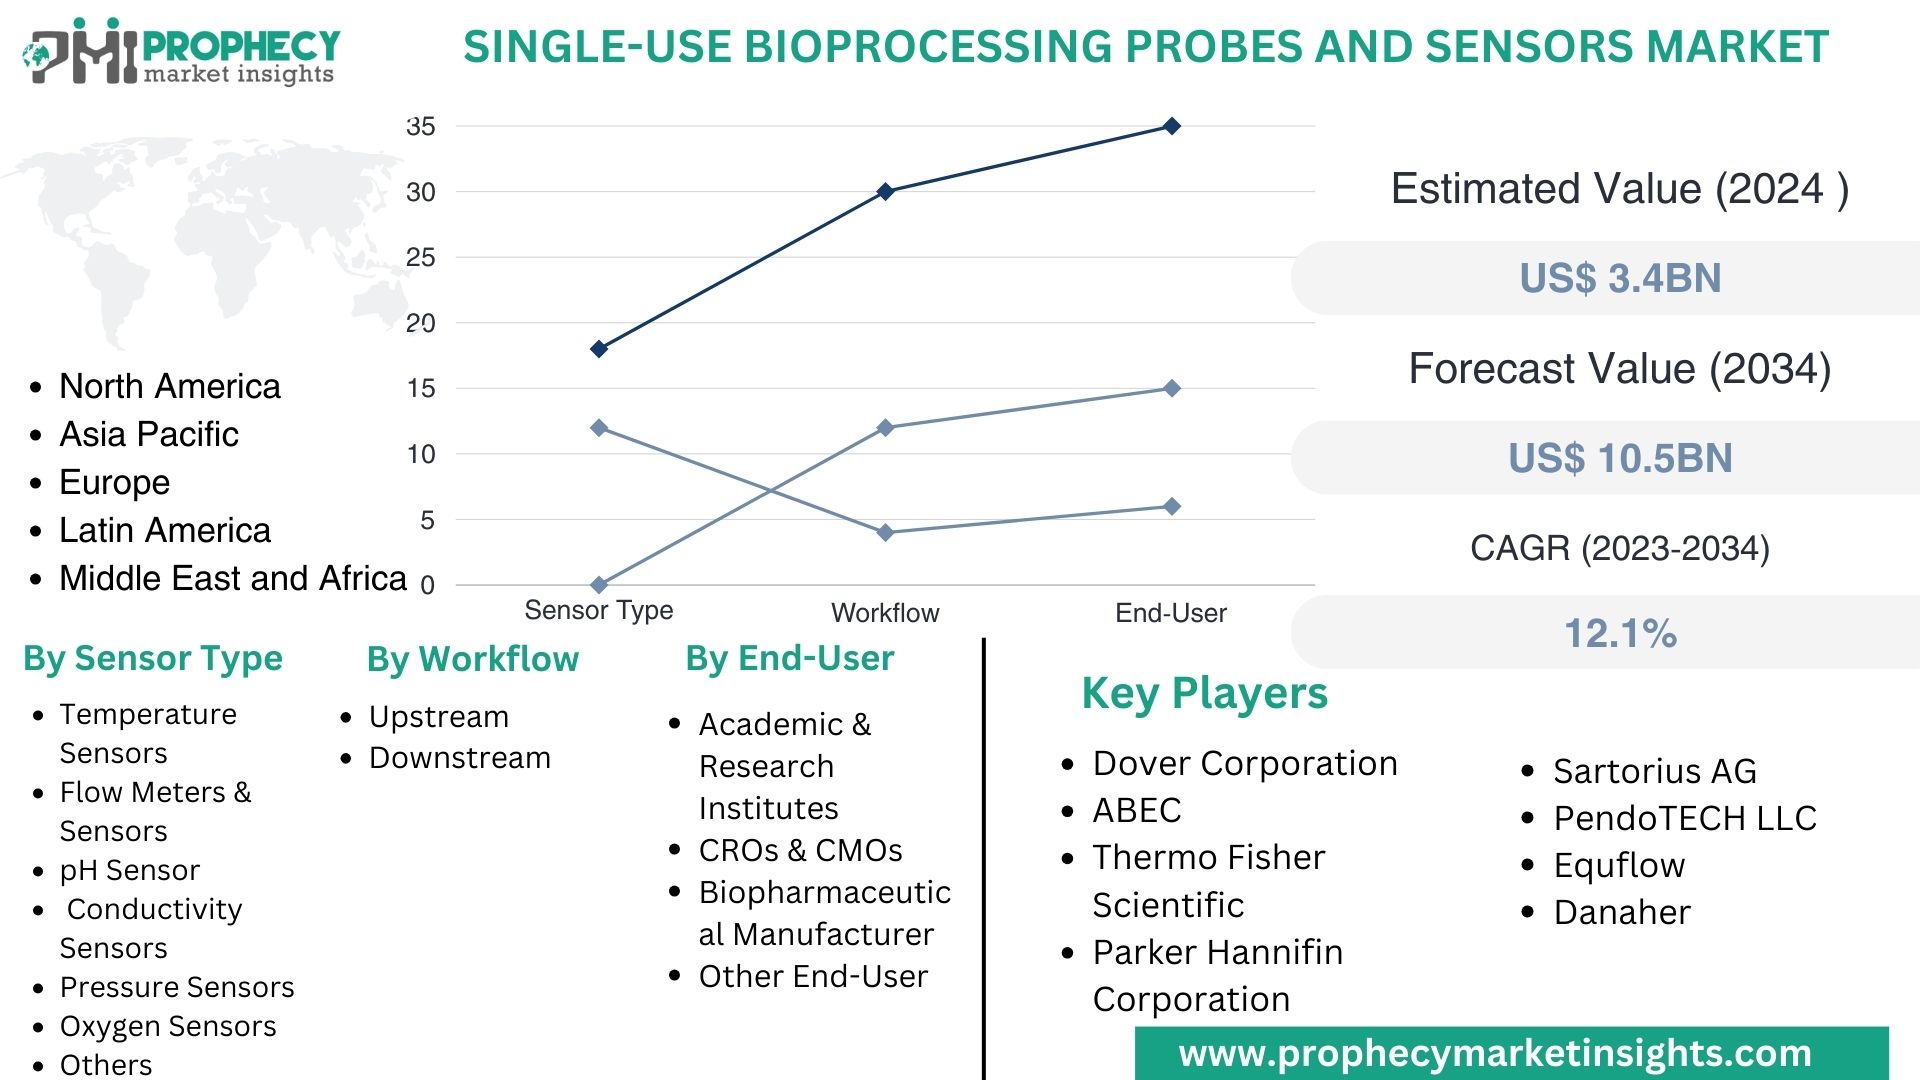 Single-use Bioprocessing Probes and Sensors Market